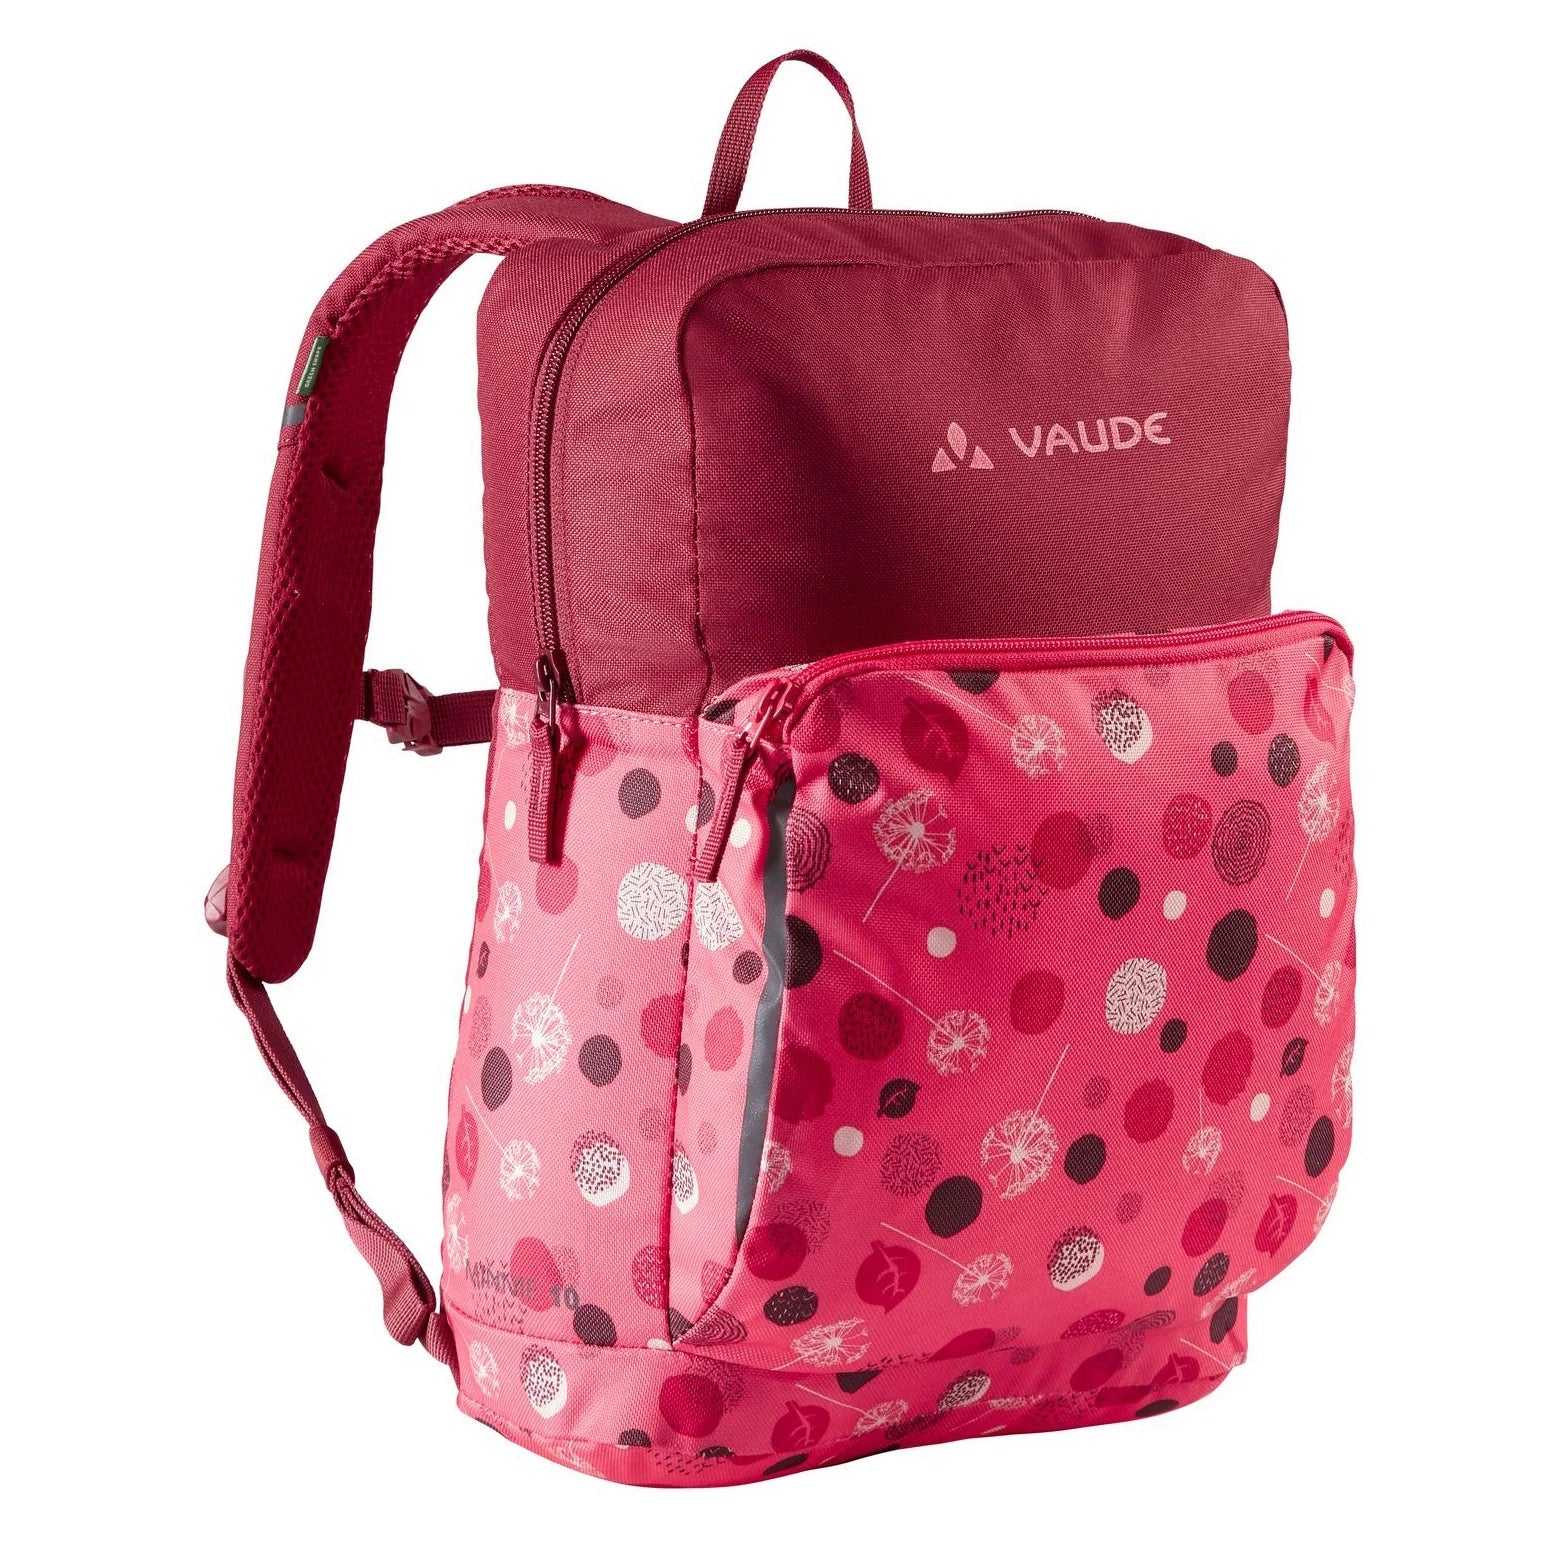 Vaude Family Minnie 10 children's backpack 34 cm - bright pink-cranberry